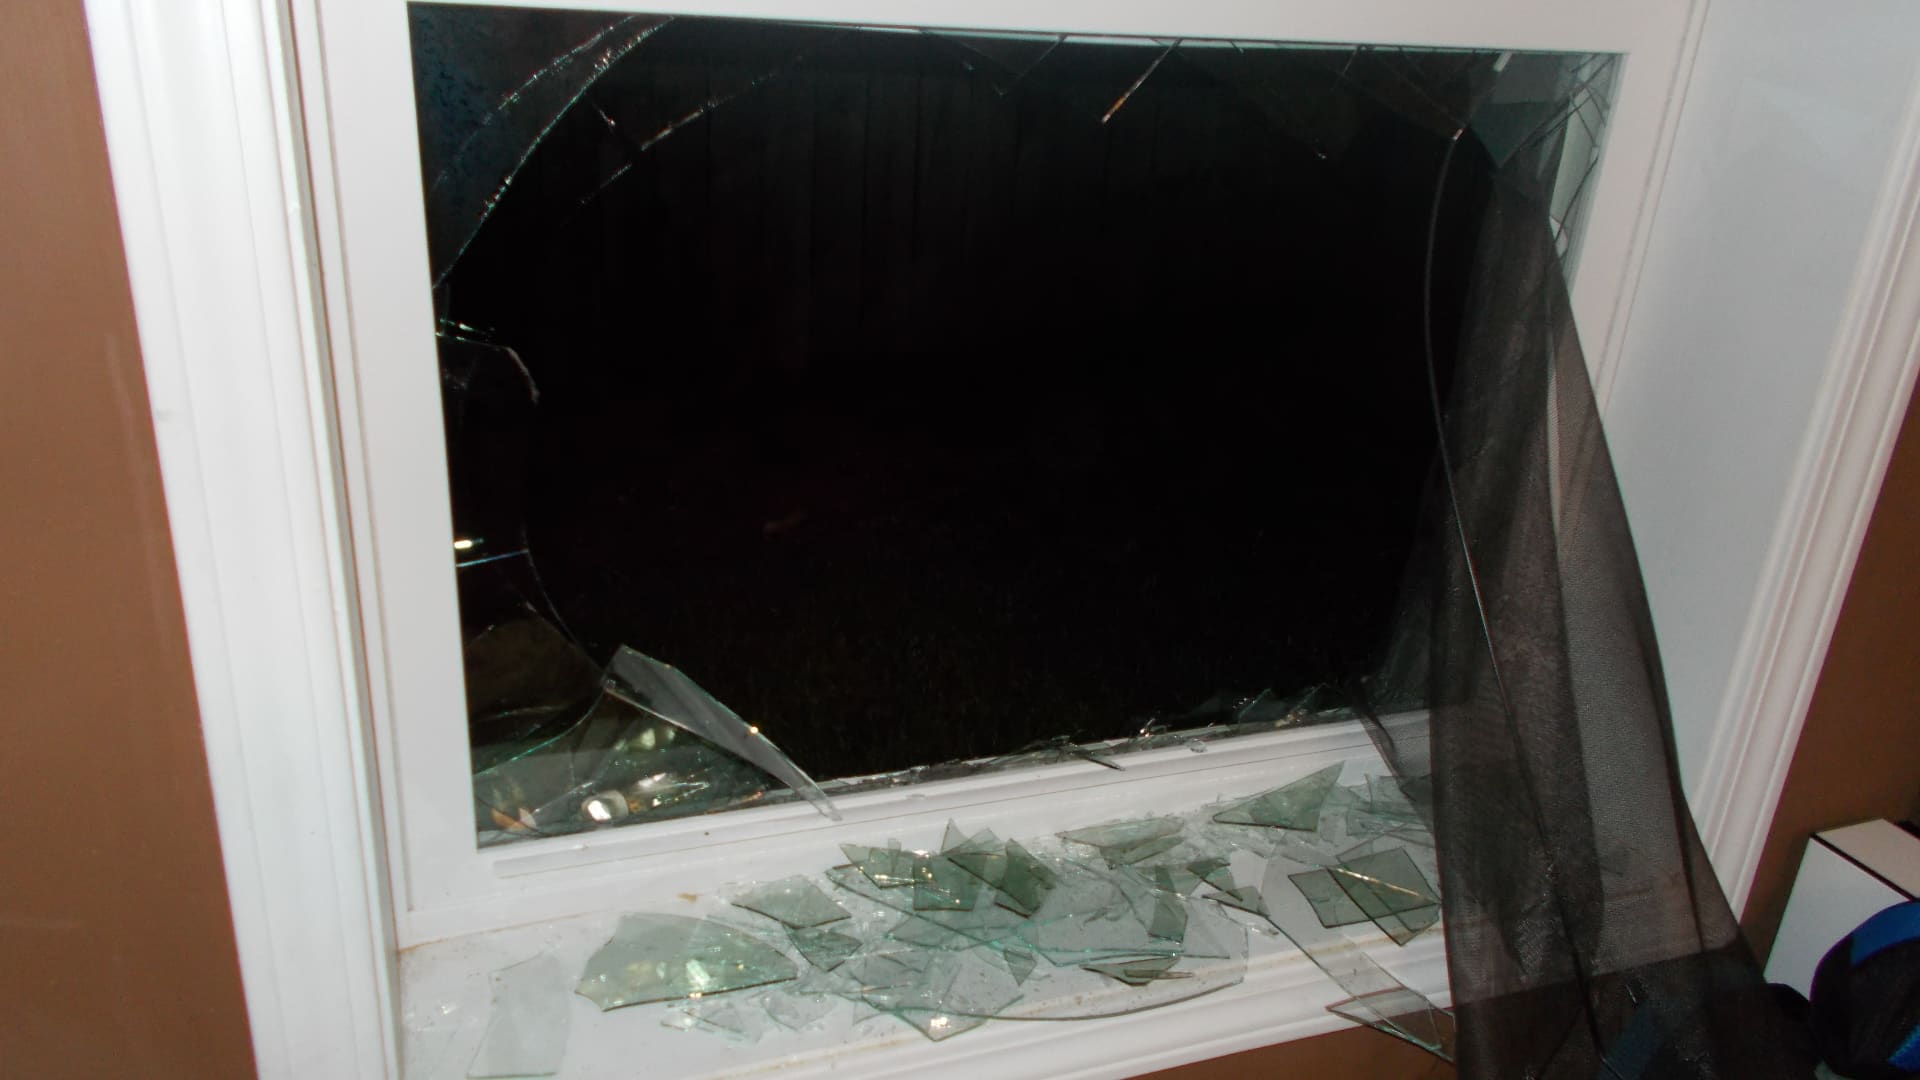 In March 2019, someone broke into Zhong's home, shattering the window.